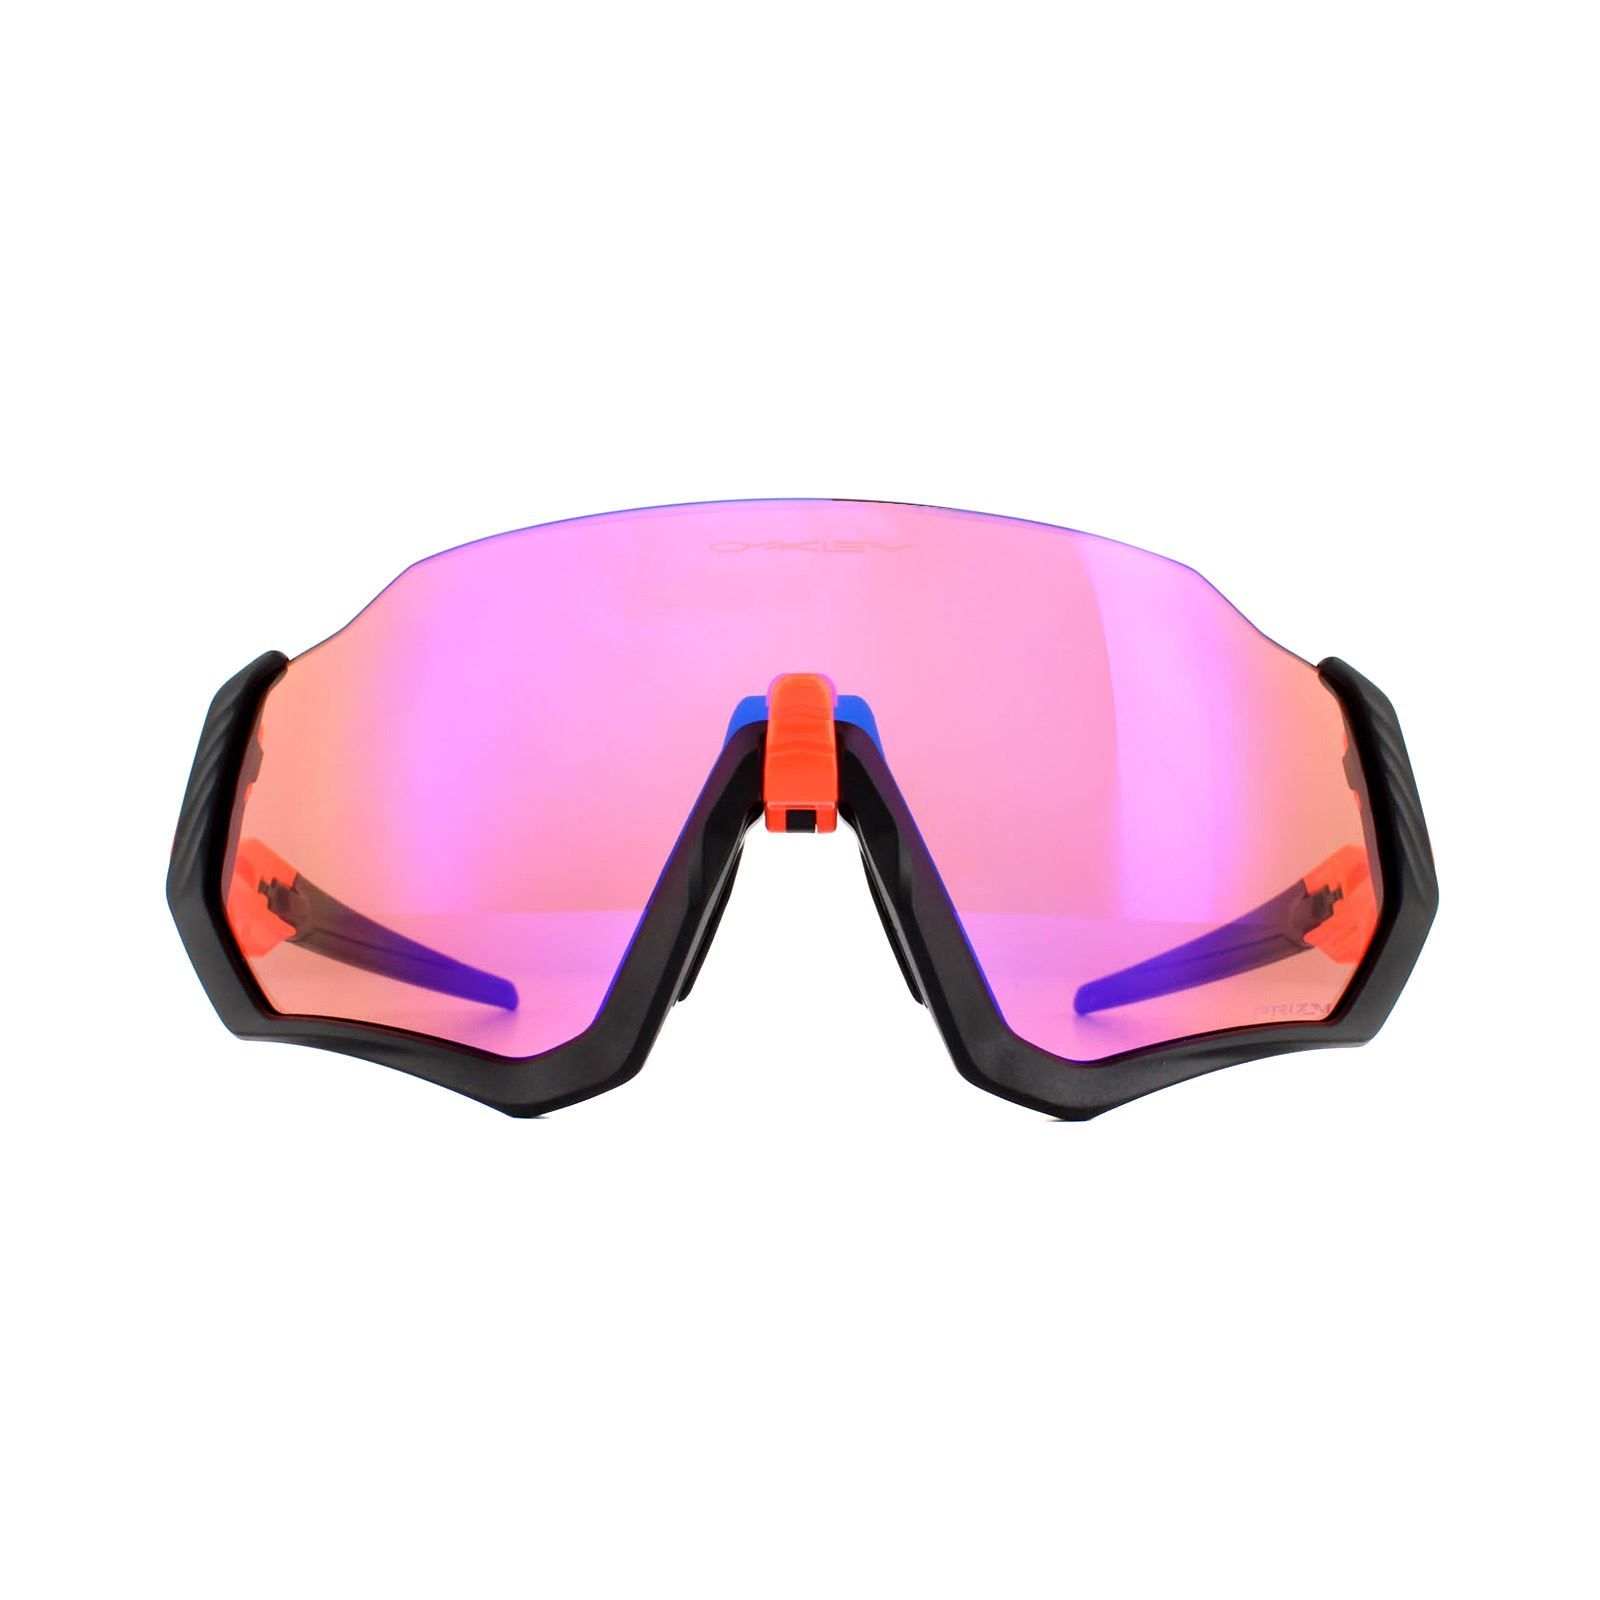 Oakley Sunglasses Flight Jacket OO9401-04 Matte Black Prizm Trail are a lightweight model made of plastic, ideal for cycling, running and beyond - durability and all-day comfort of lightweight O-Matterâ„¢ frame material, frame suitable for medium to large faces